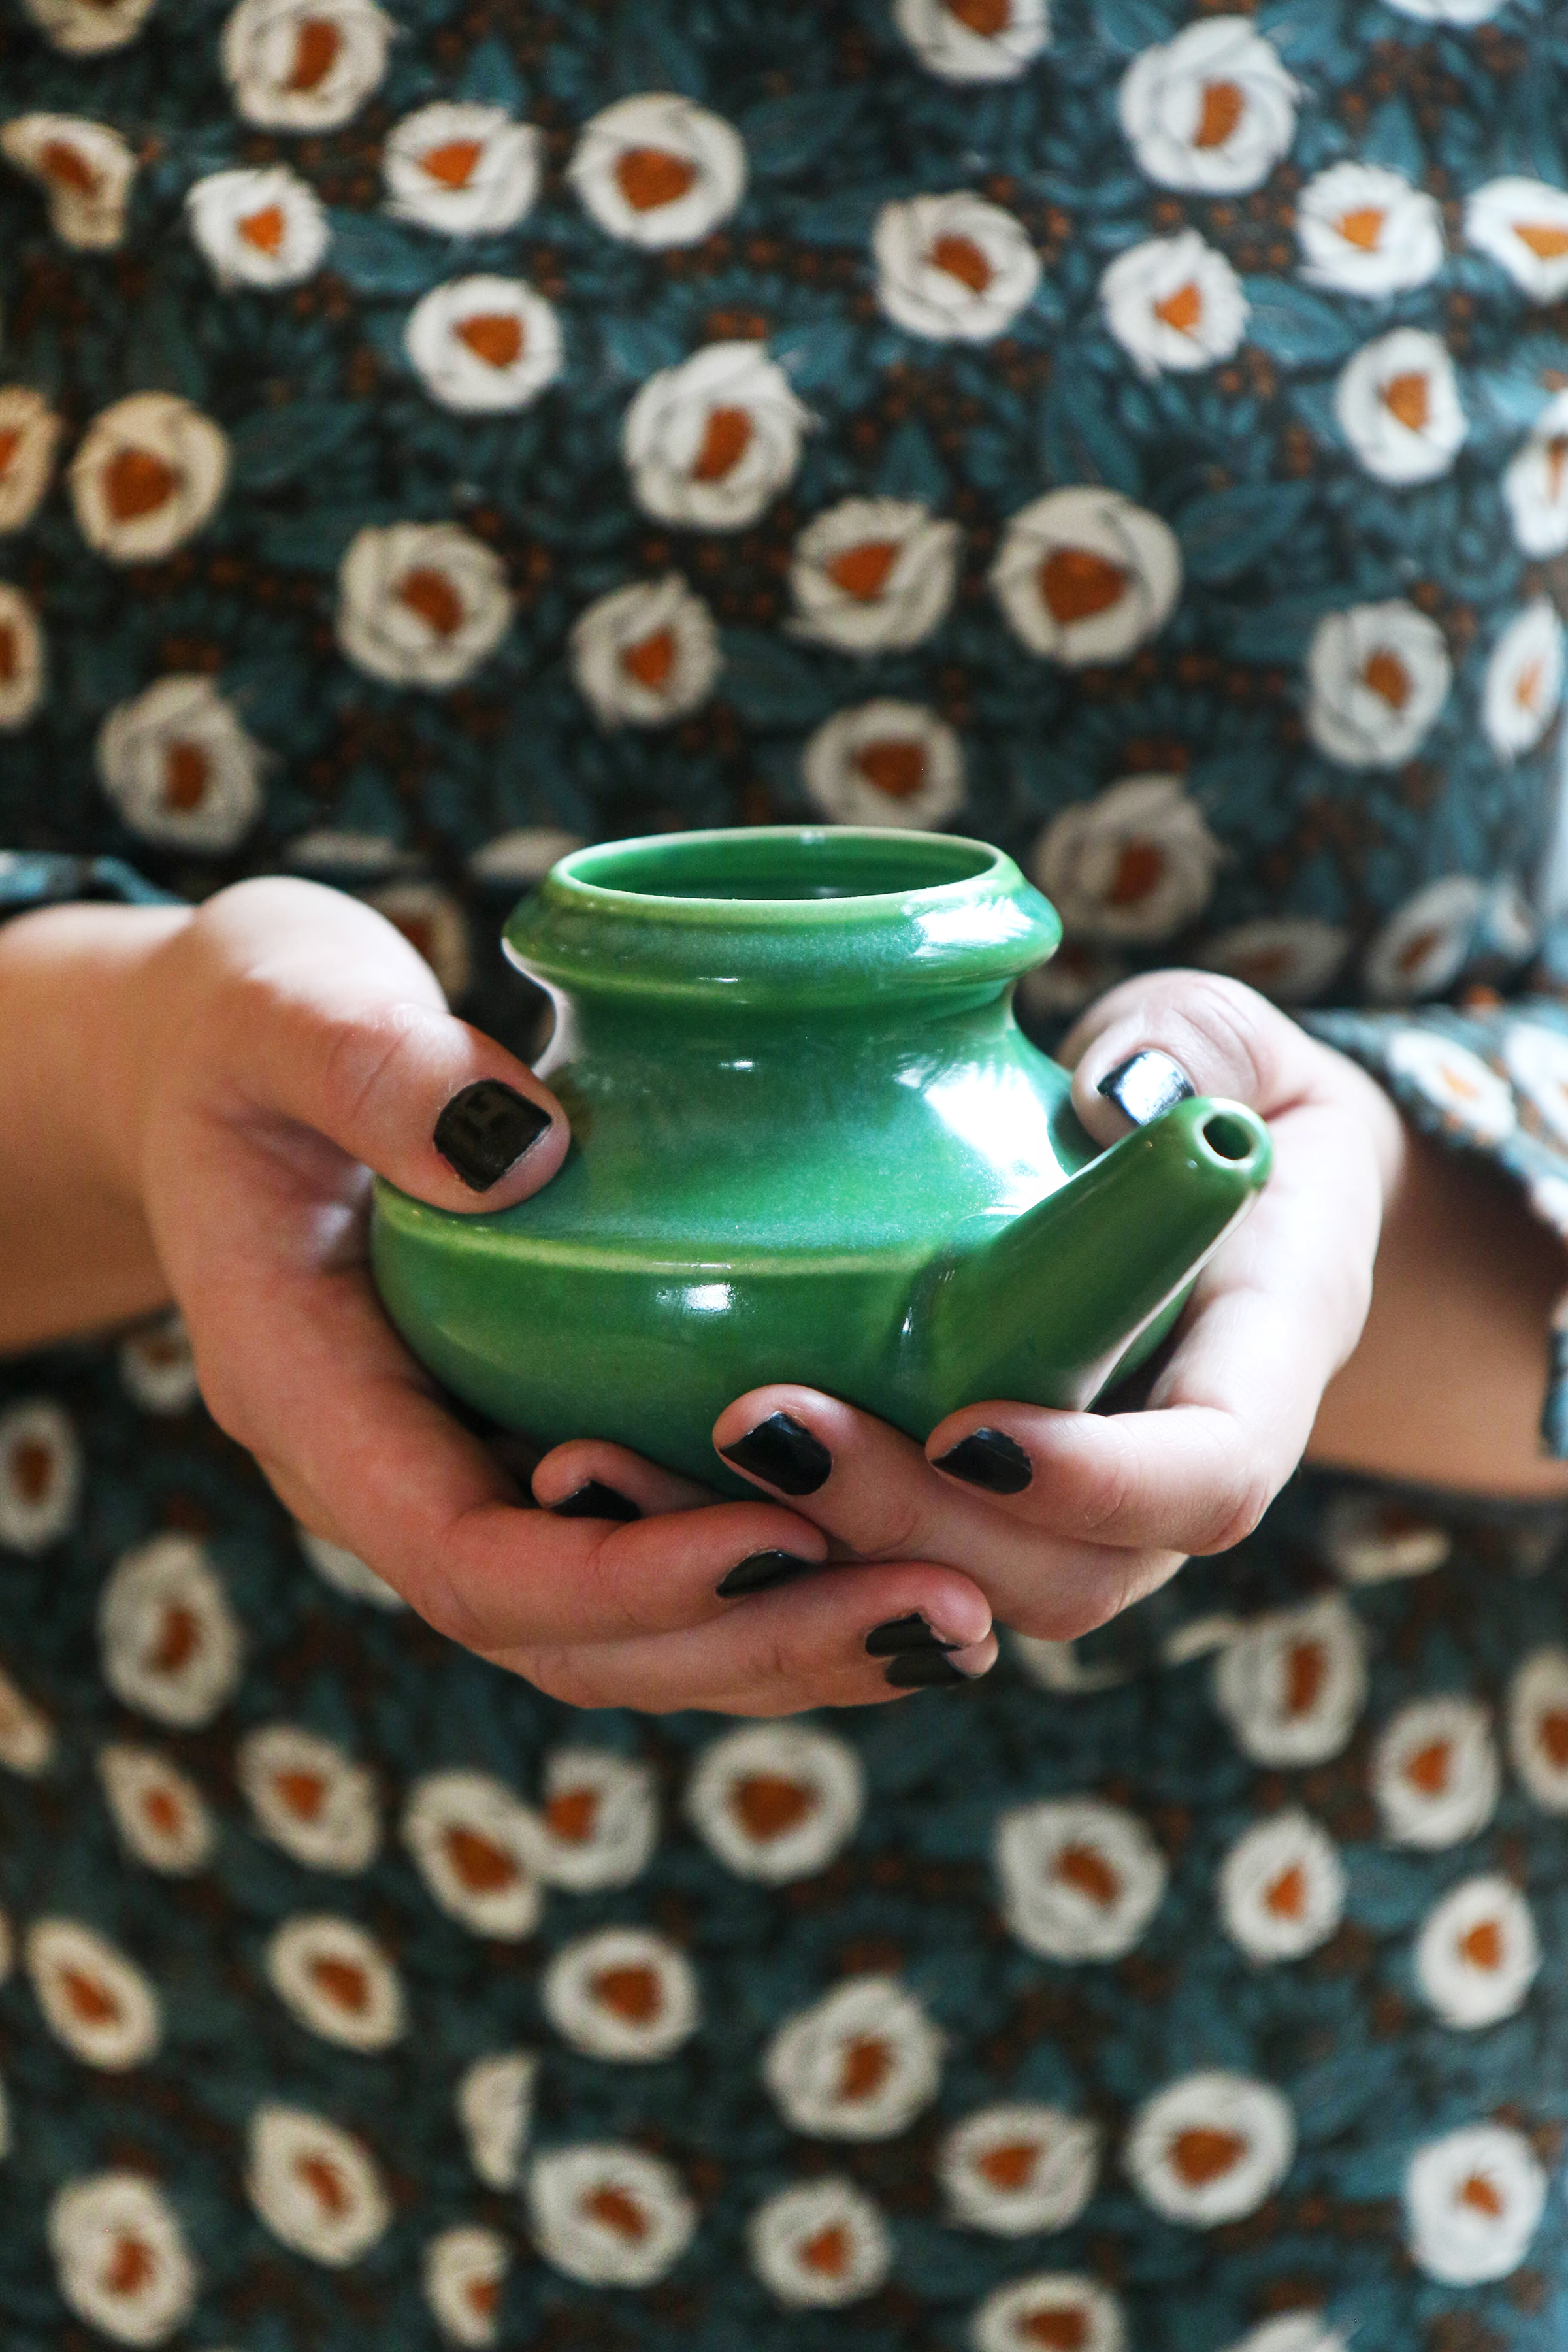 green-ceramic-neti-pot-being-held-in-hands-with-dark-nail-polish-in-front-of-patterned-dress